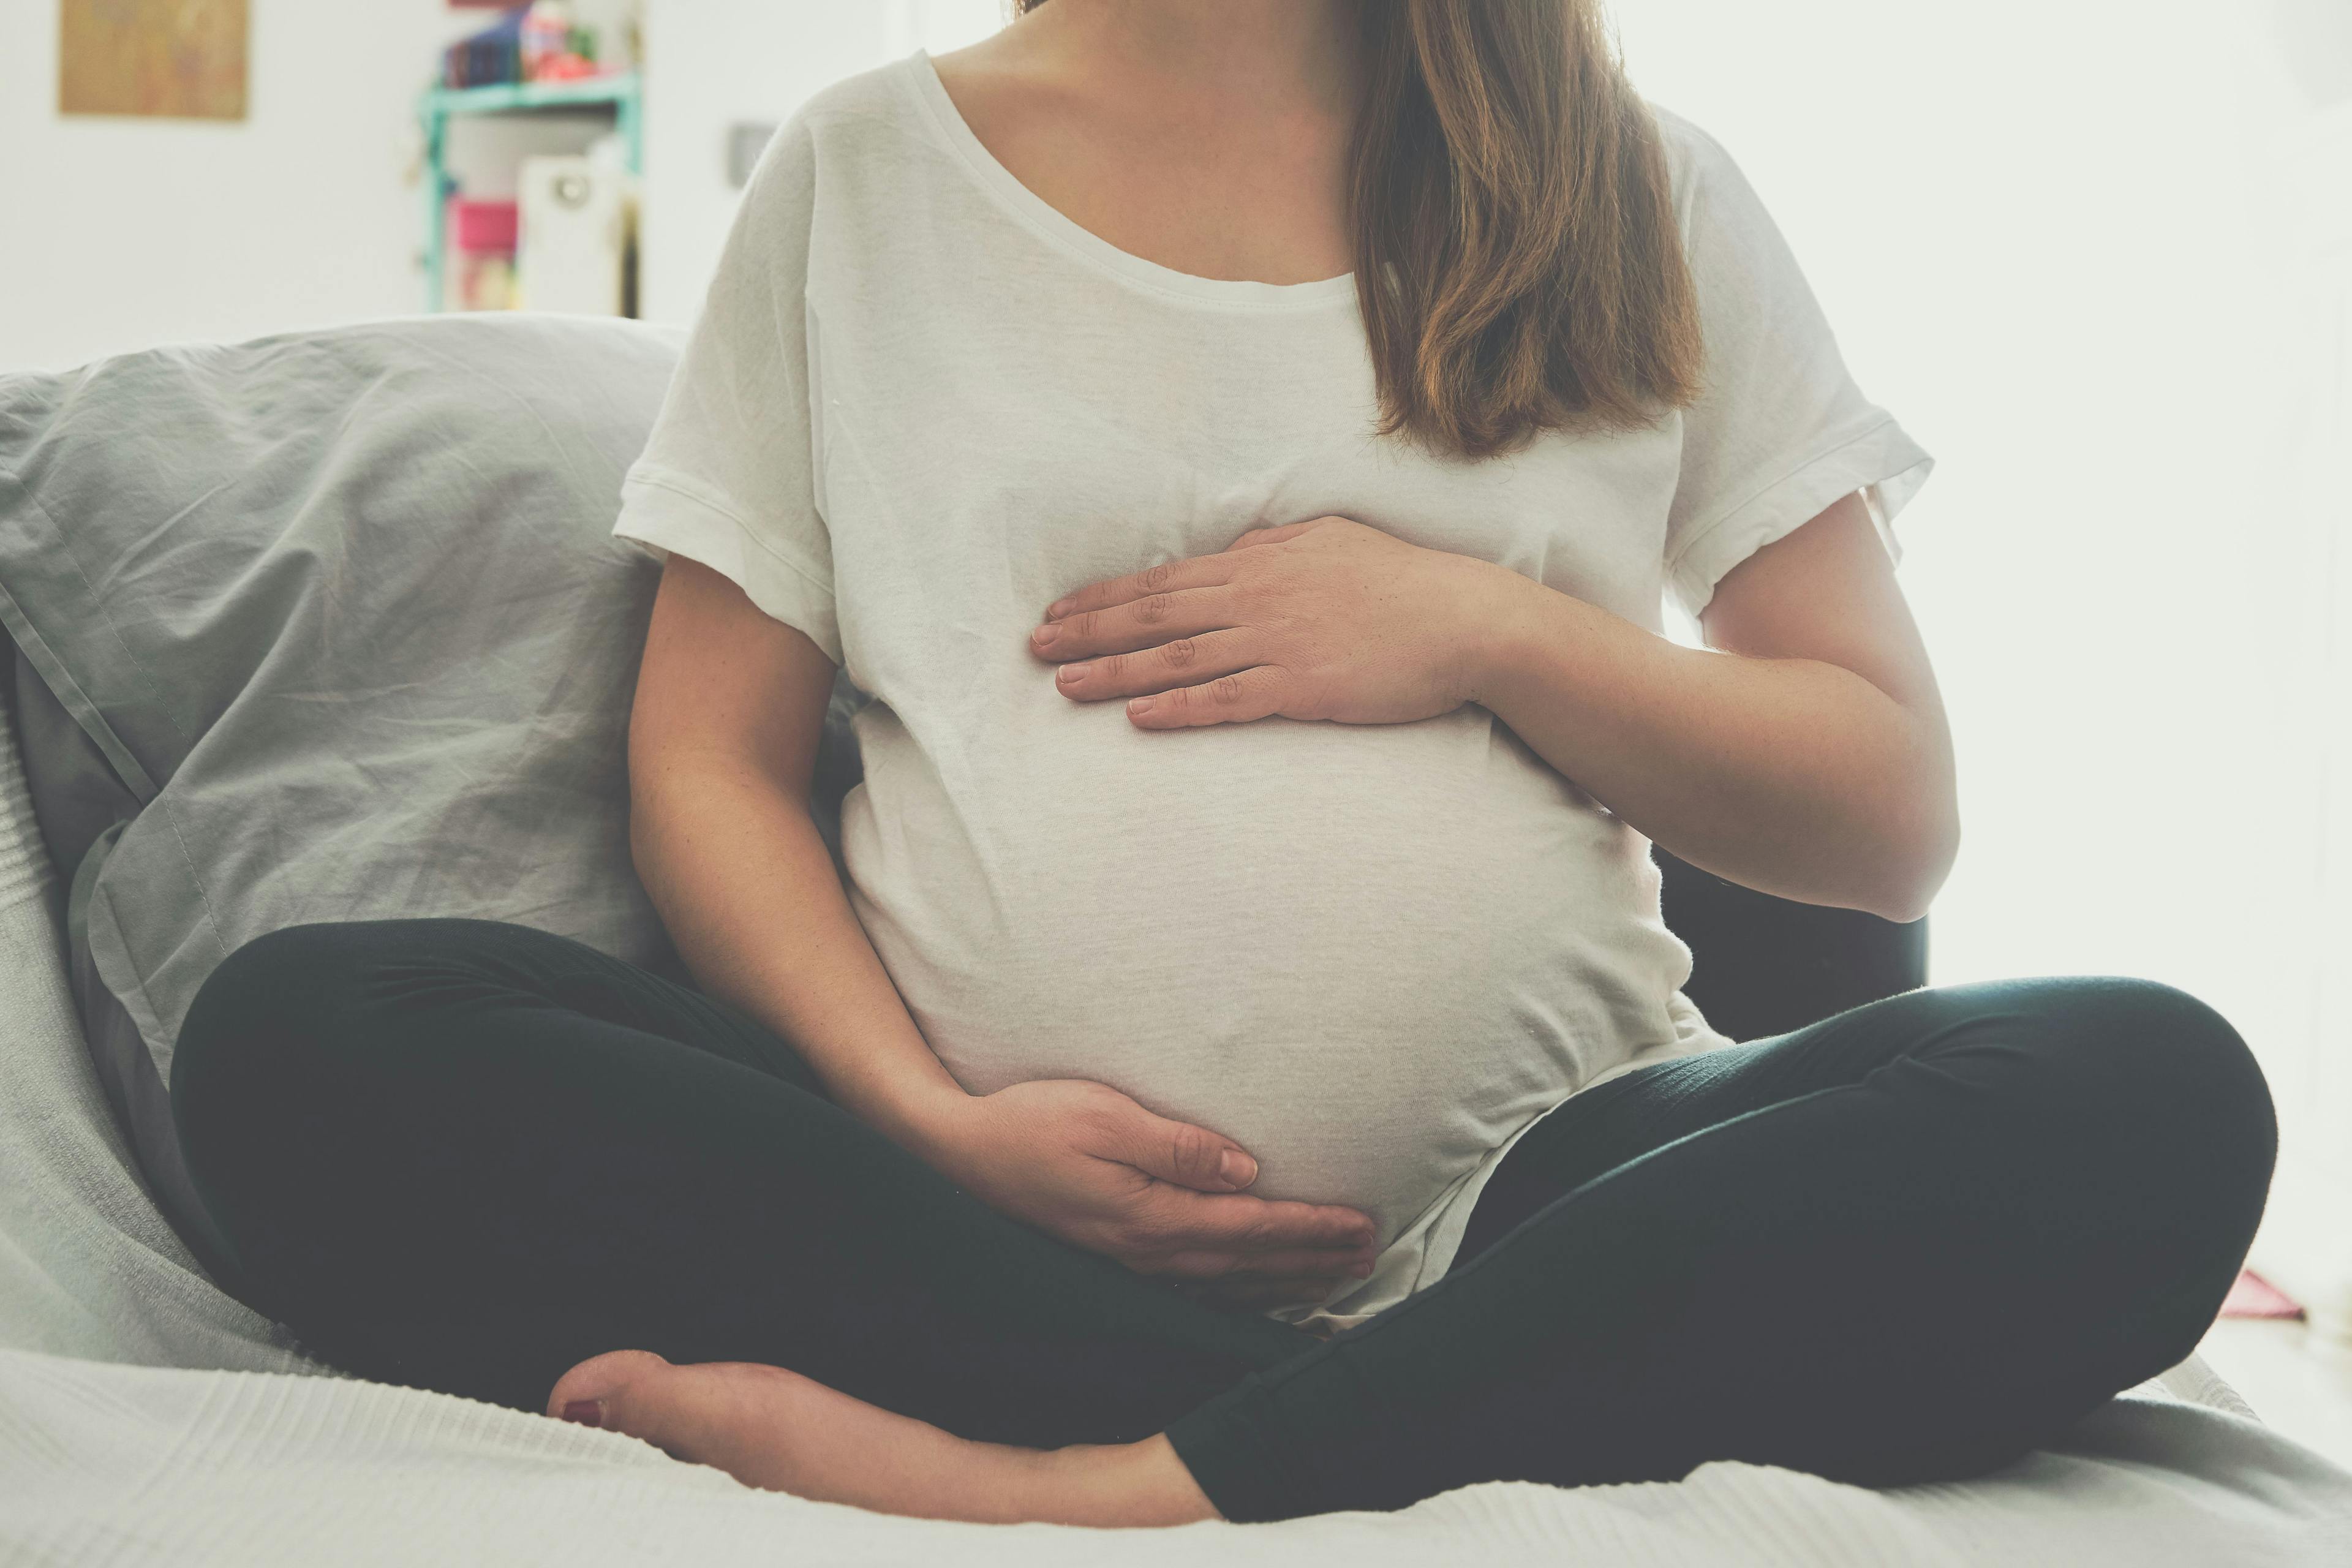 Pregnant woman touching her belly | Image Credit: SianStock - stock.adobe.com